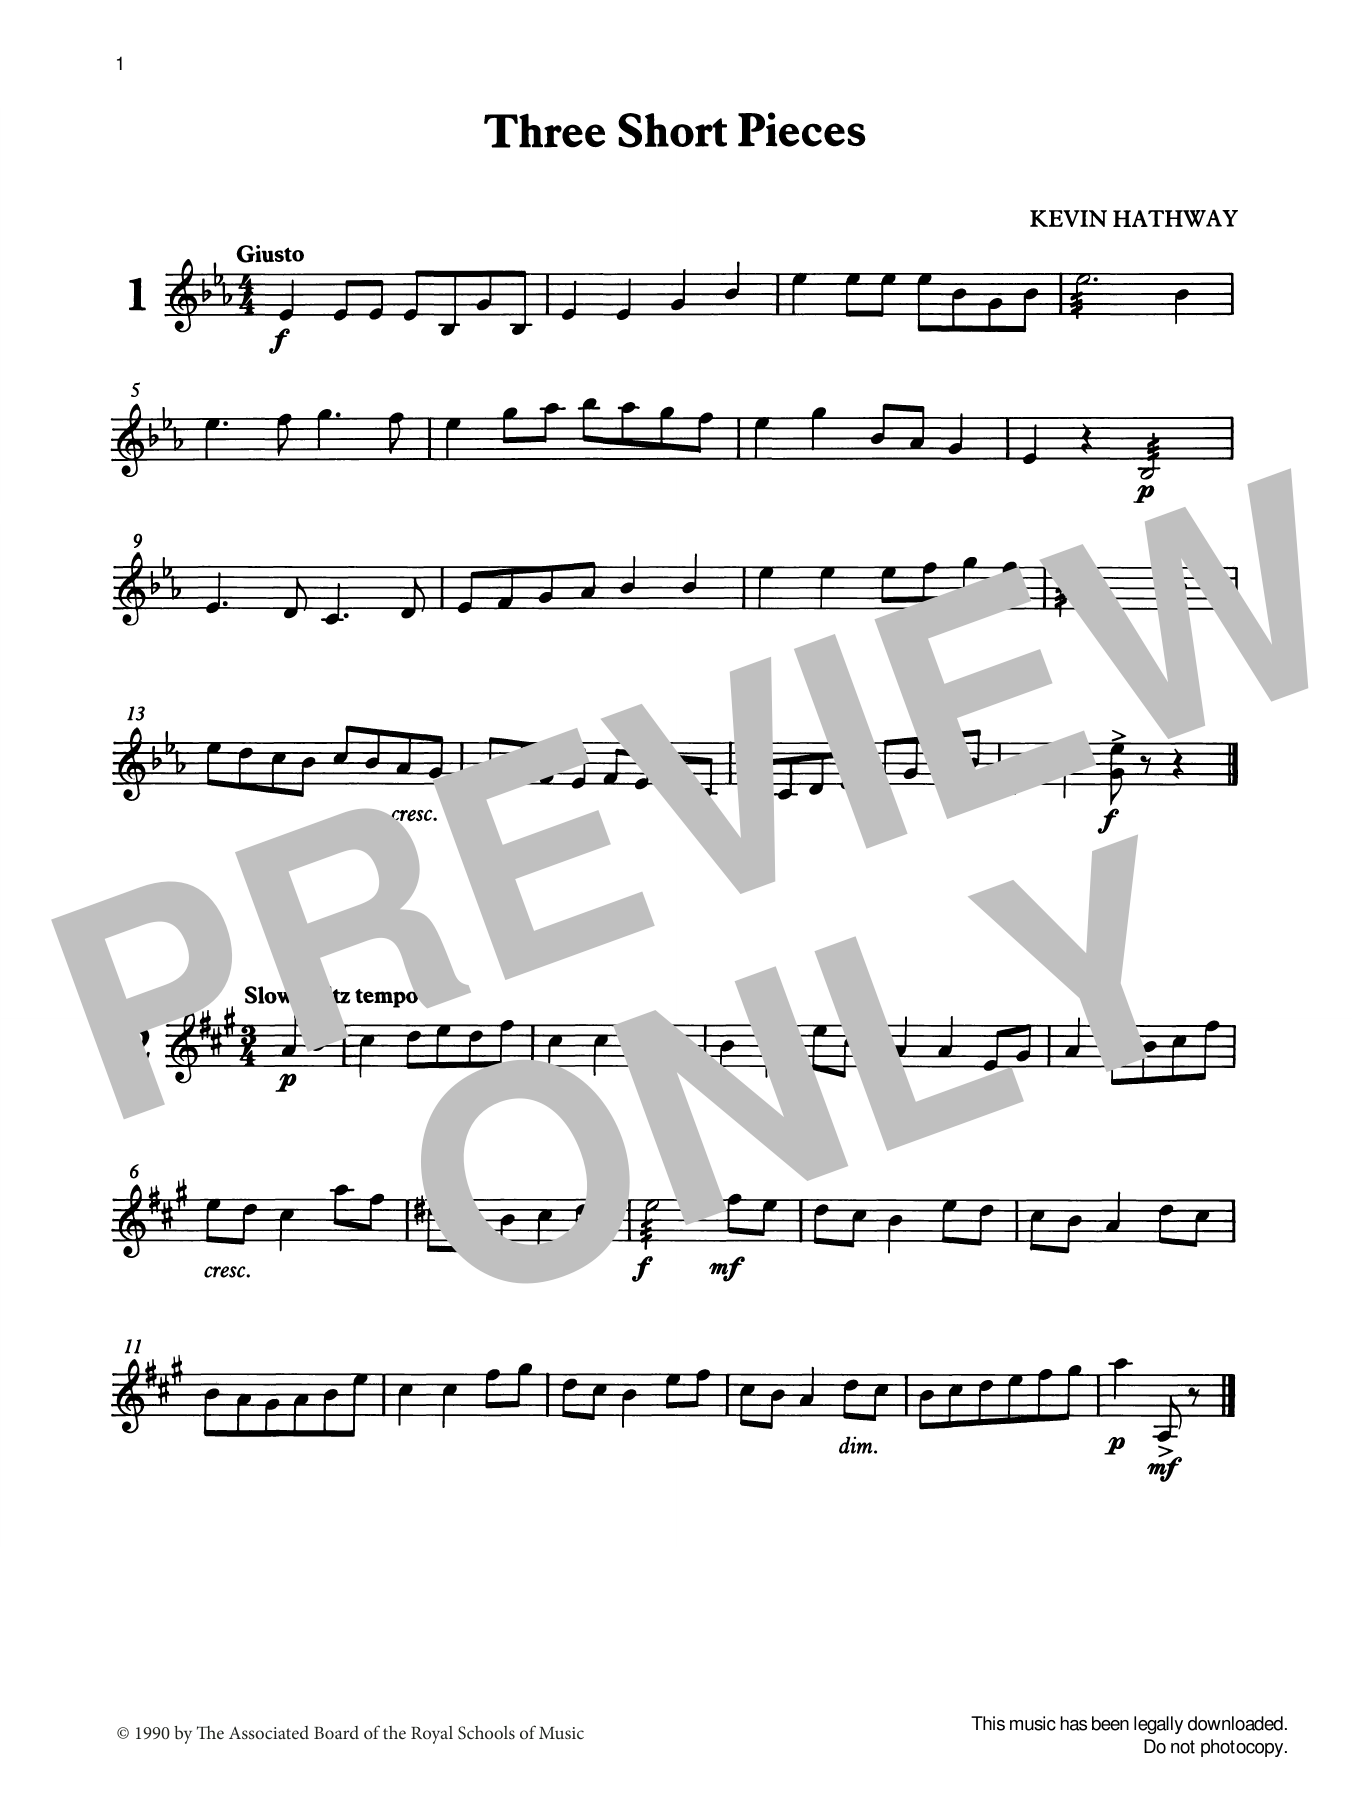 Download Ian Wright and Kevin Hathaway Three Short Pieces from Graded Music fo Sheet Music